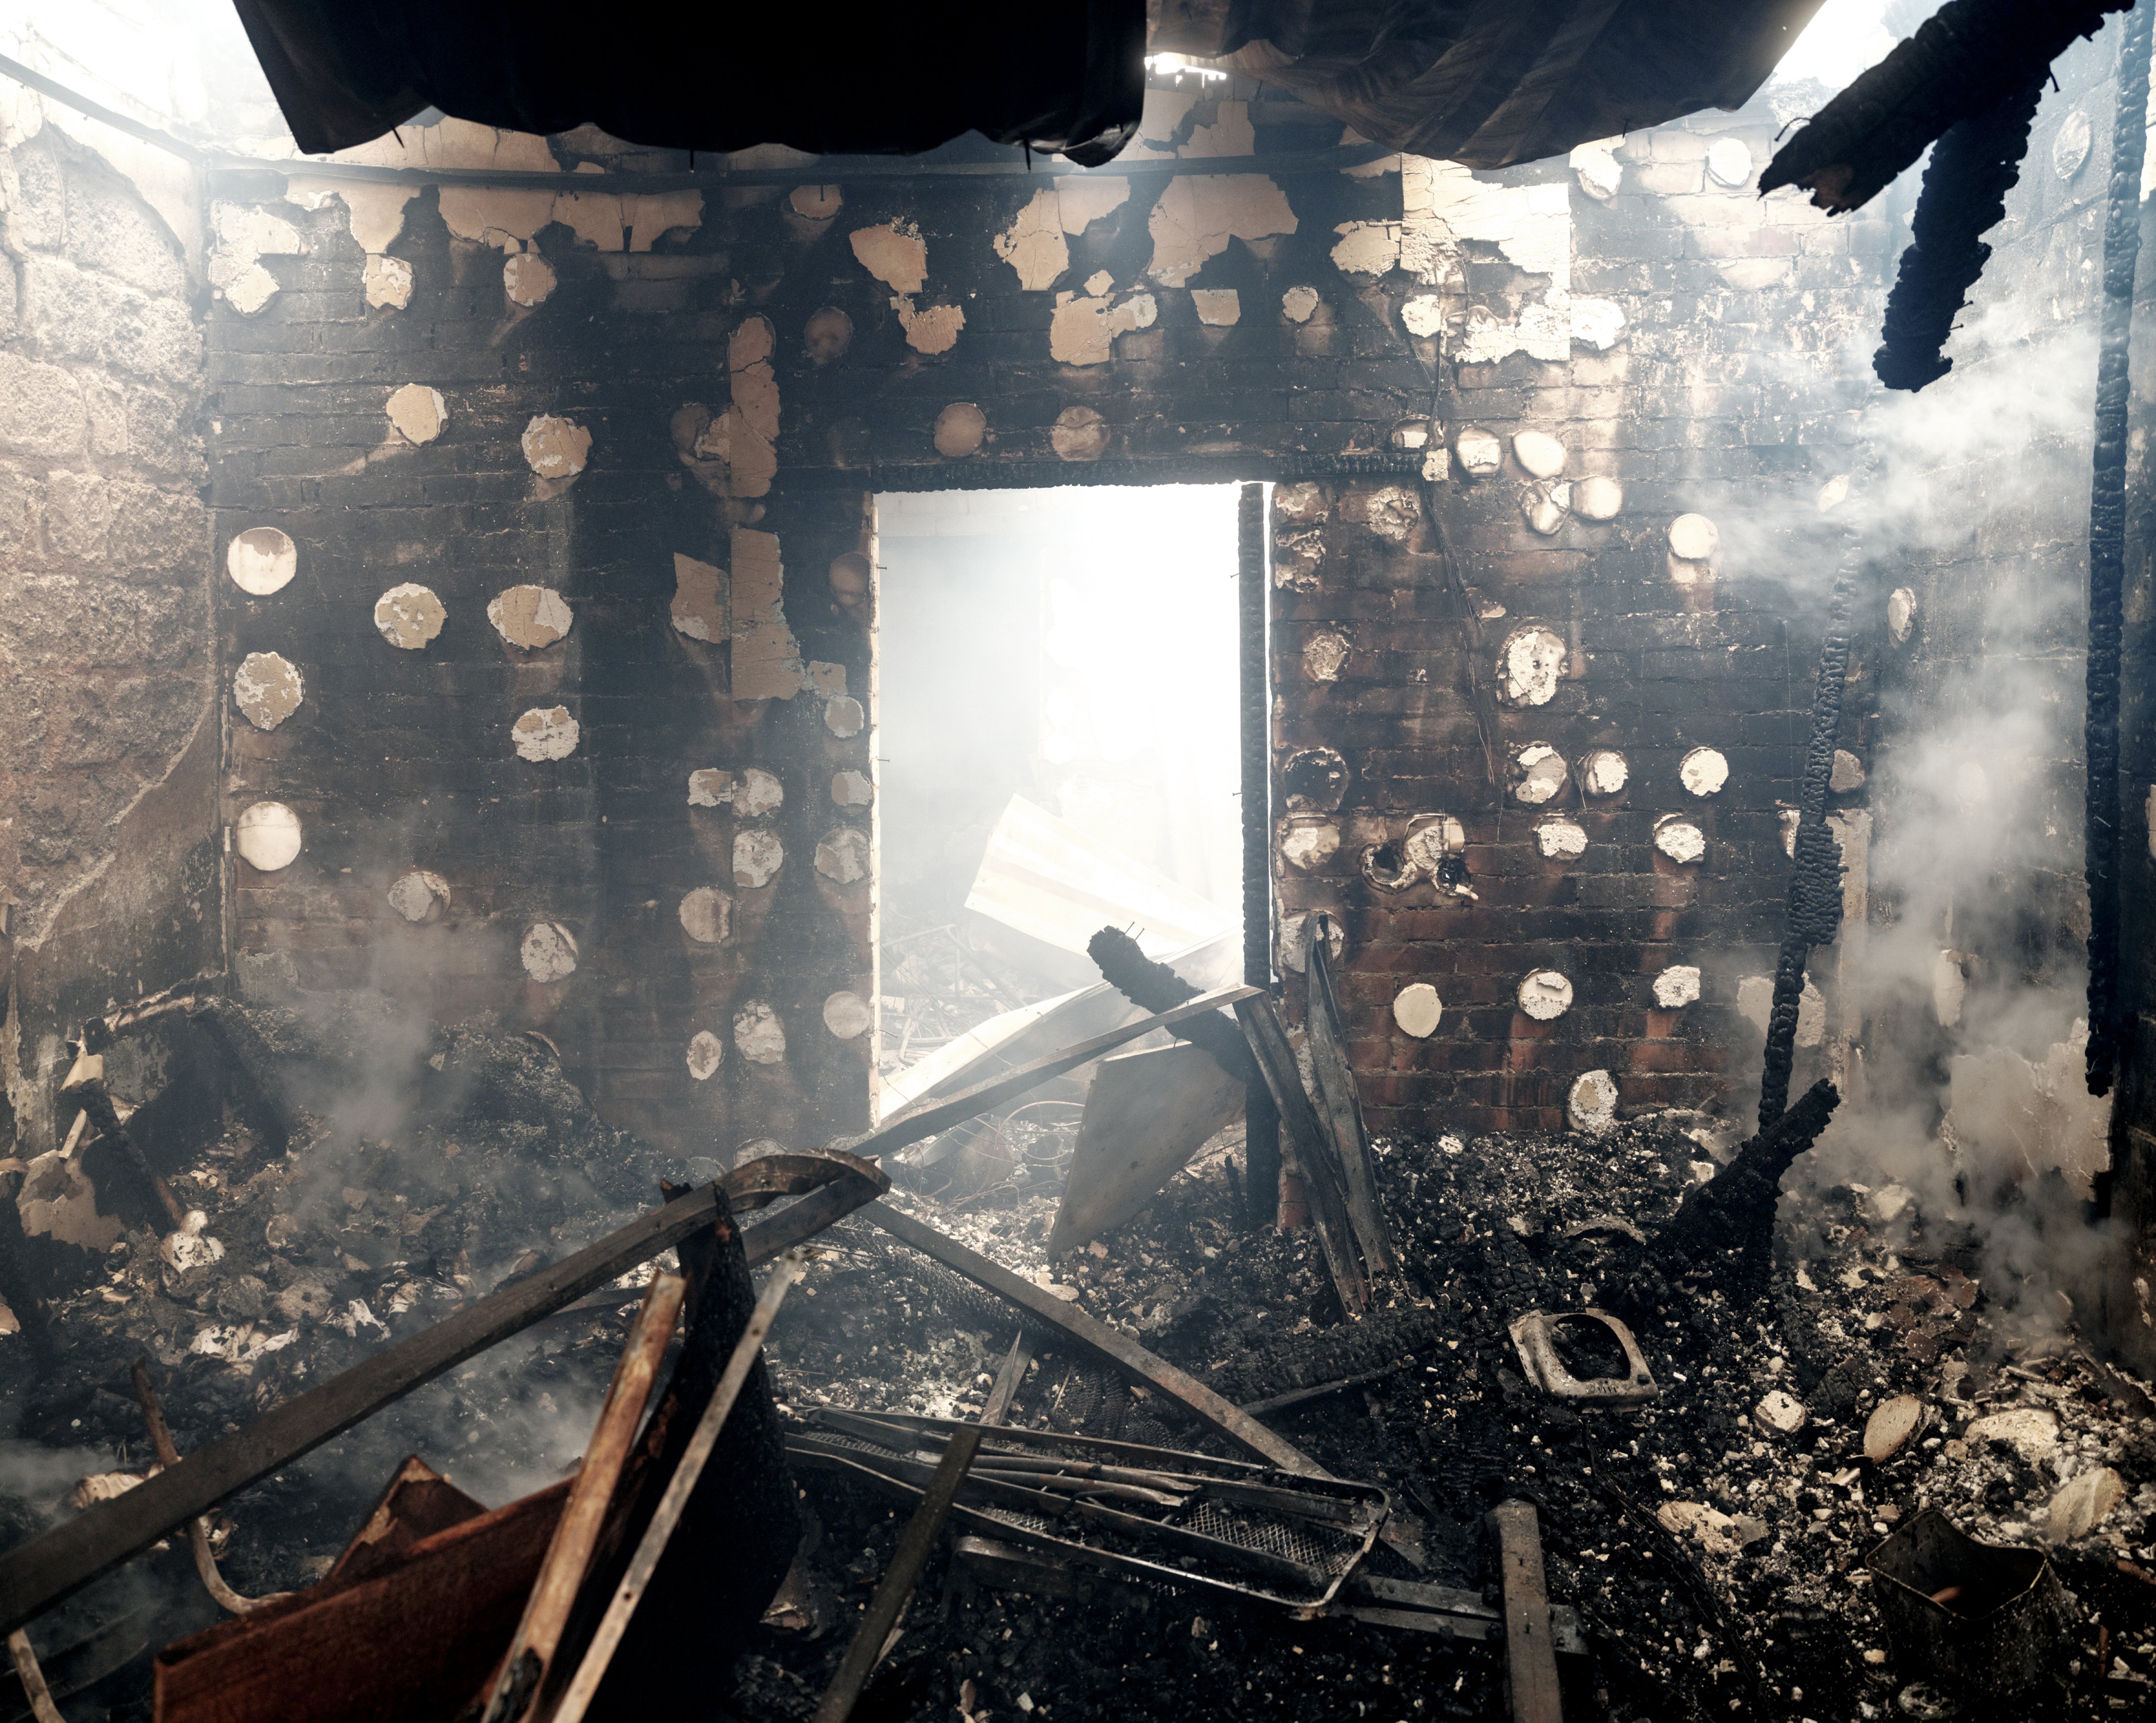 24 February 2022: Burning civilian houses hit by a rocket in Mariupol, Ukraine. MSF has been working in eastern Ukraine for the last eight years, trying to improve access to health care for remote, conflict-affected populations. 